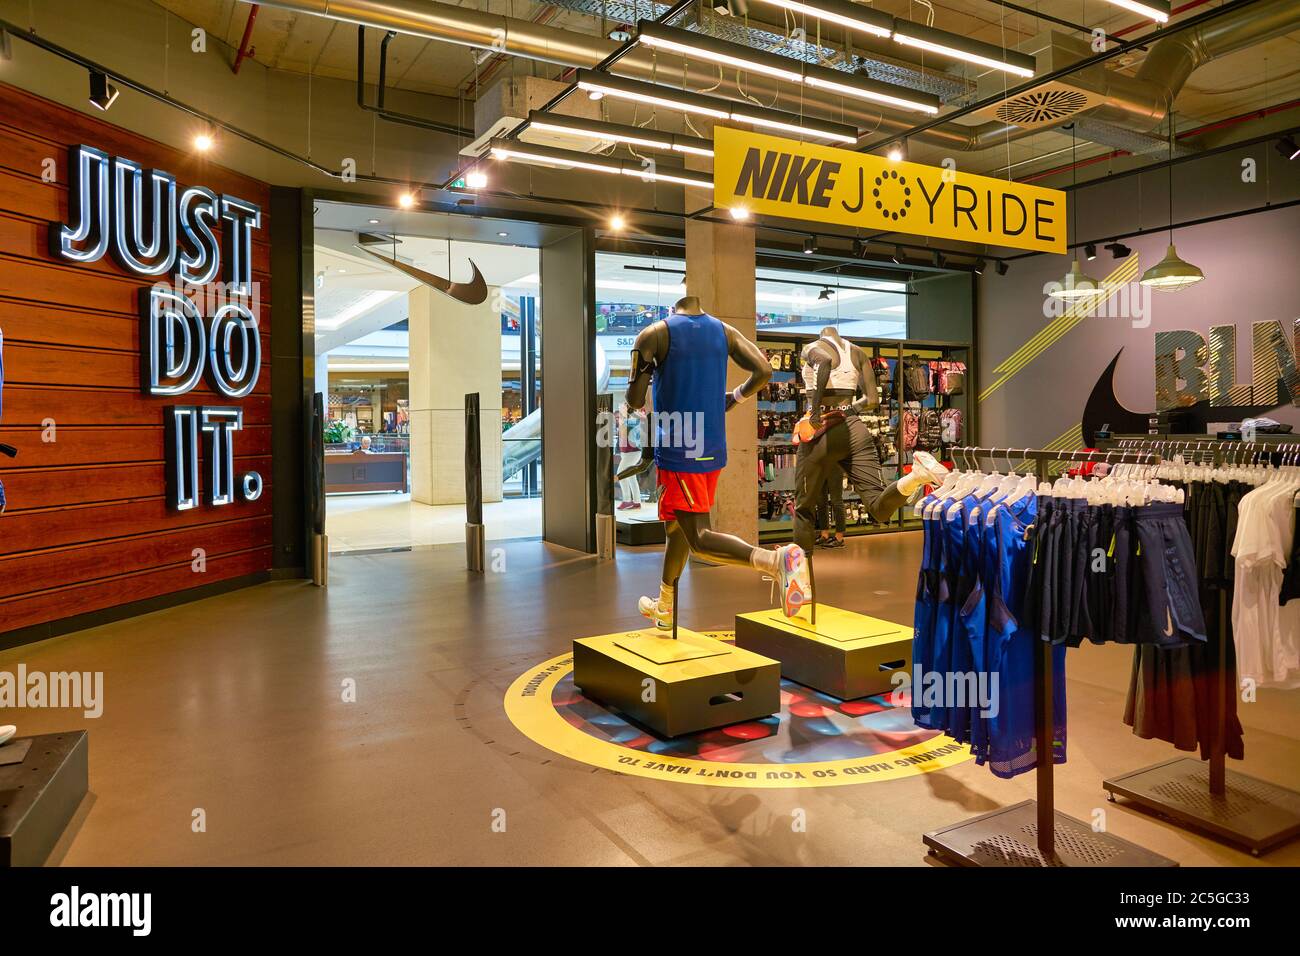 nike outlet arundel mills mall